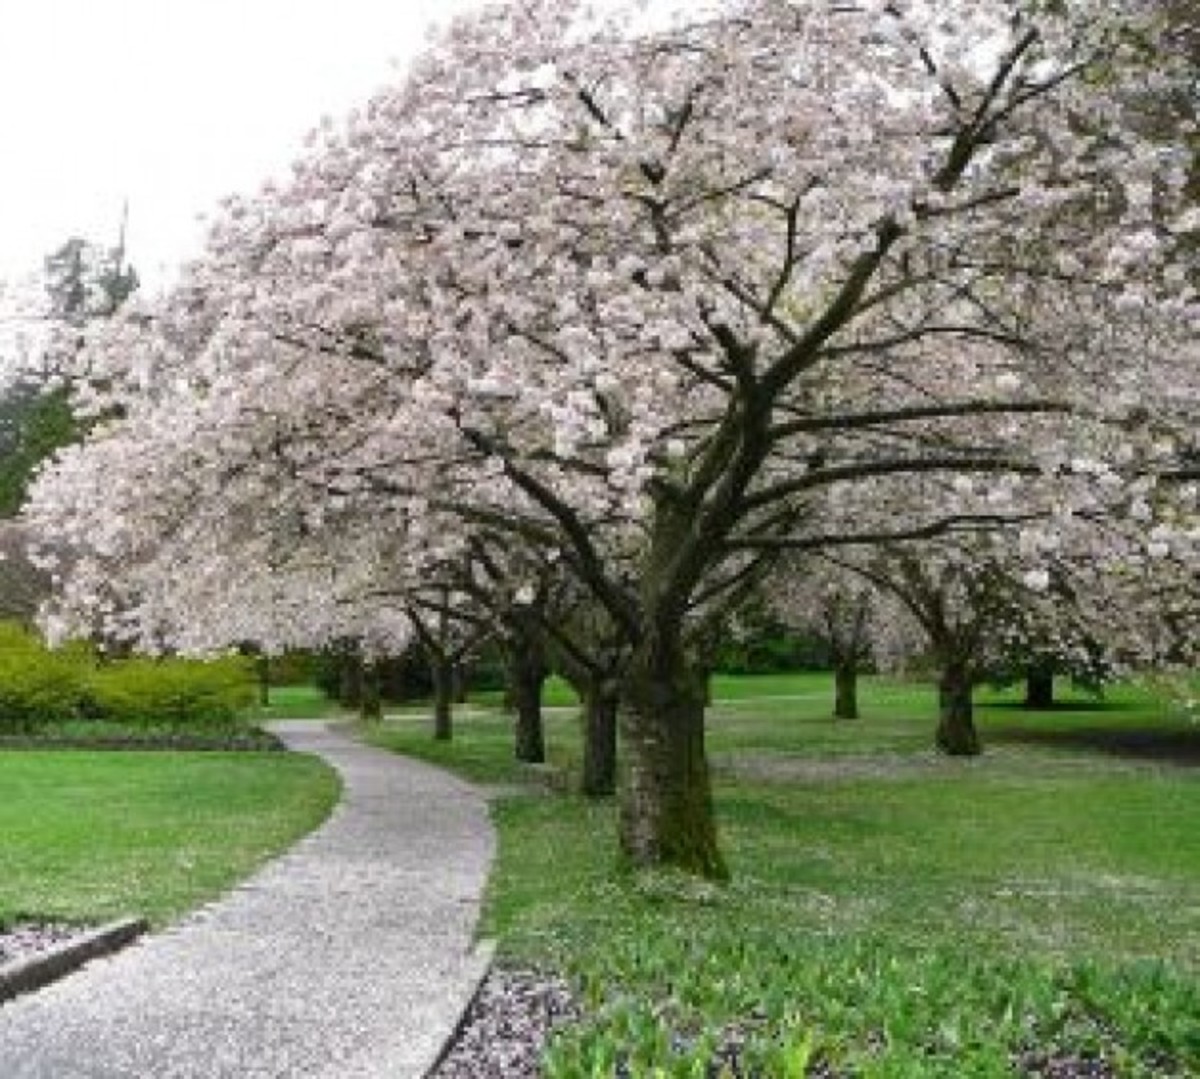 Spring Trees in the Park